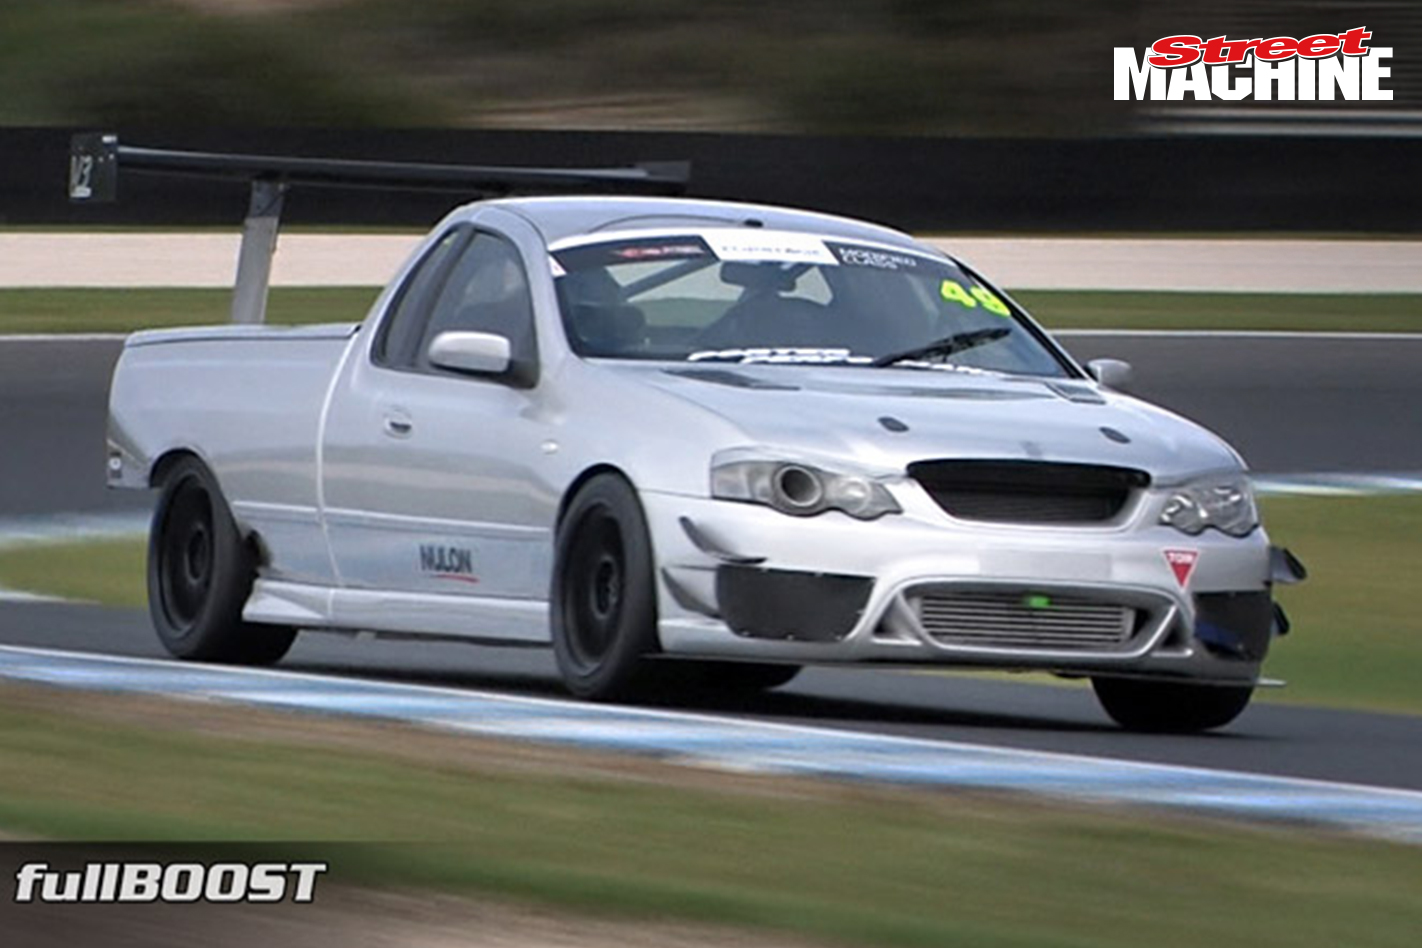 Ford Xr6 Turbo Falcon Ute Time Attack Car Video